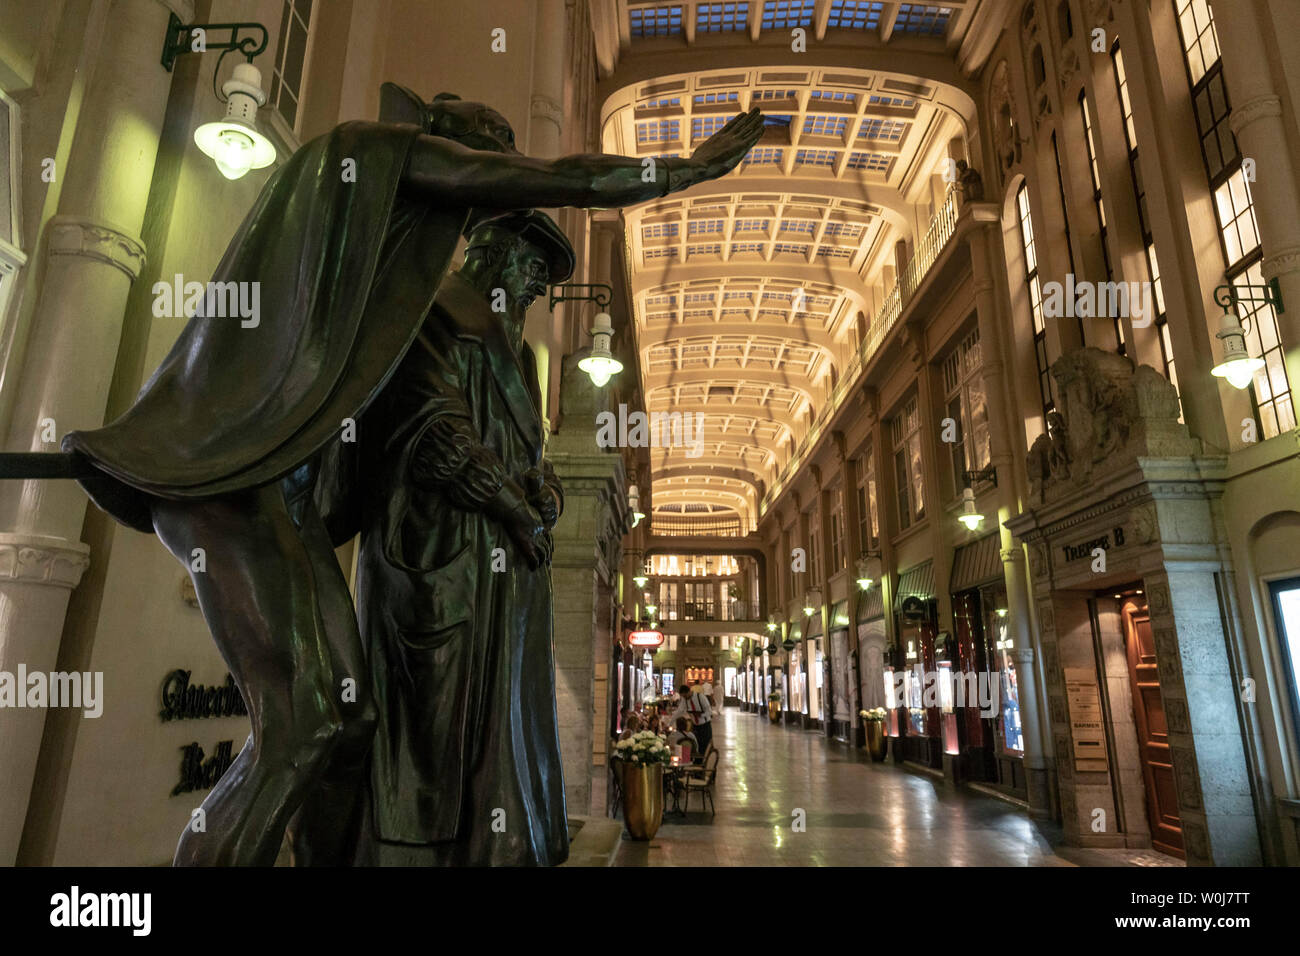 Madler Passage, Mephistopheles and Faust sculptures, Leipzig, Saxony, Germany, Europe Stock Photo